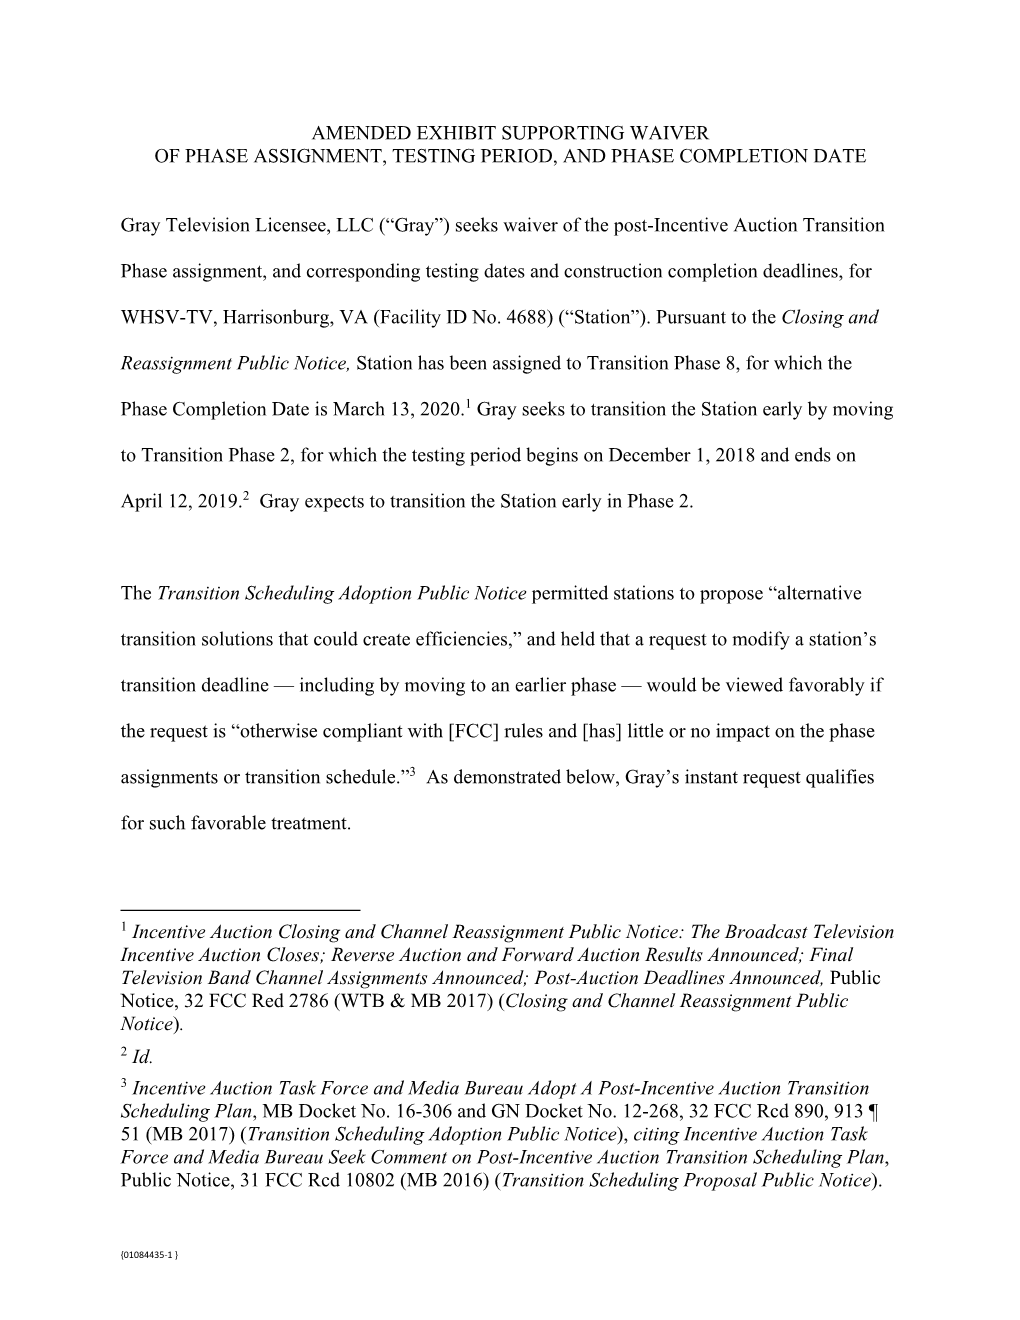 AMENDED EXHIBIT SUPPORTING WAIVER of PHASE ASSIGNMENT, TESTING PERIOD, and PHASE COMPLETION DATE Gray Television Licensee